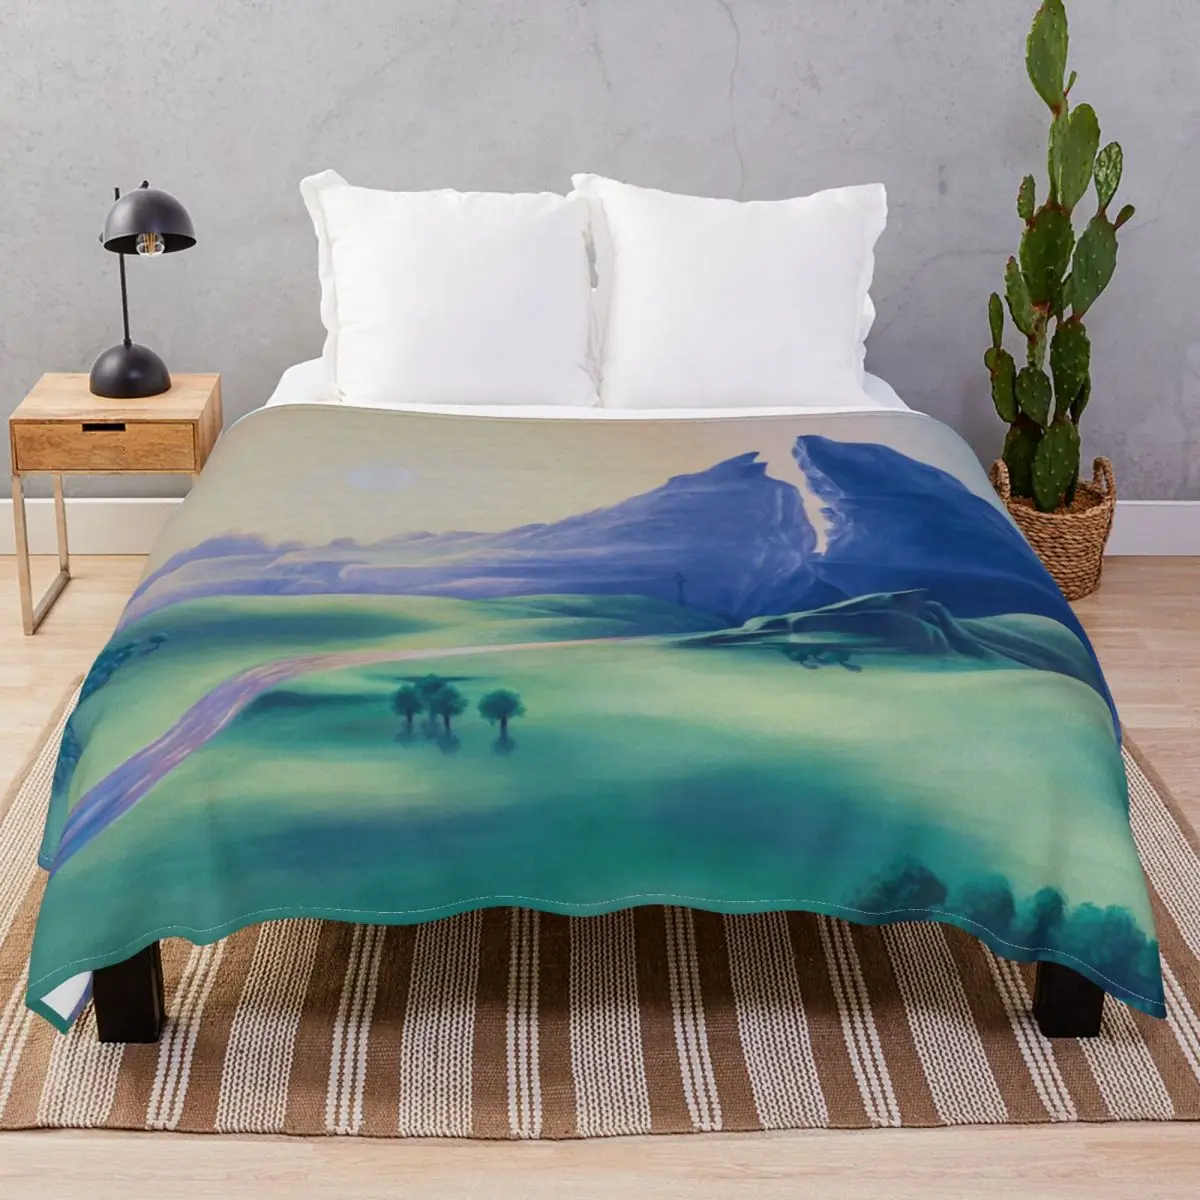 Dueling Peaks Blankets Fleece Textile Decor Portable Throw Blanket for Bed Home Couch Travel Office